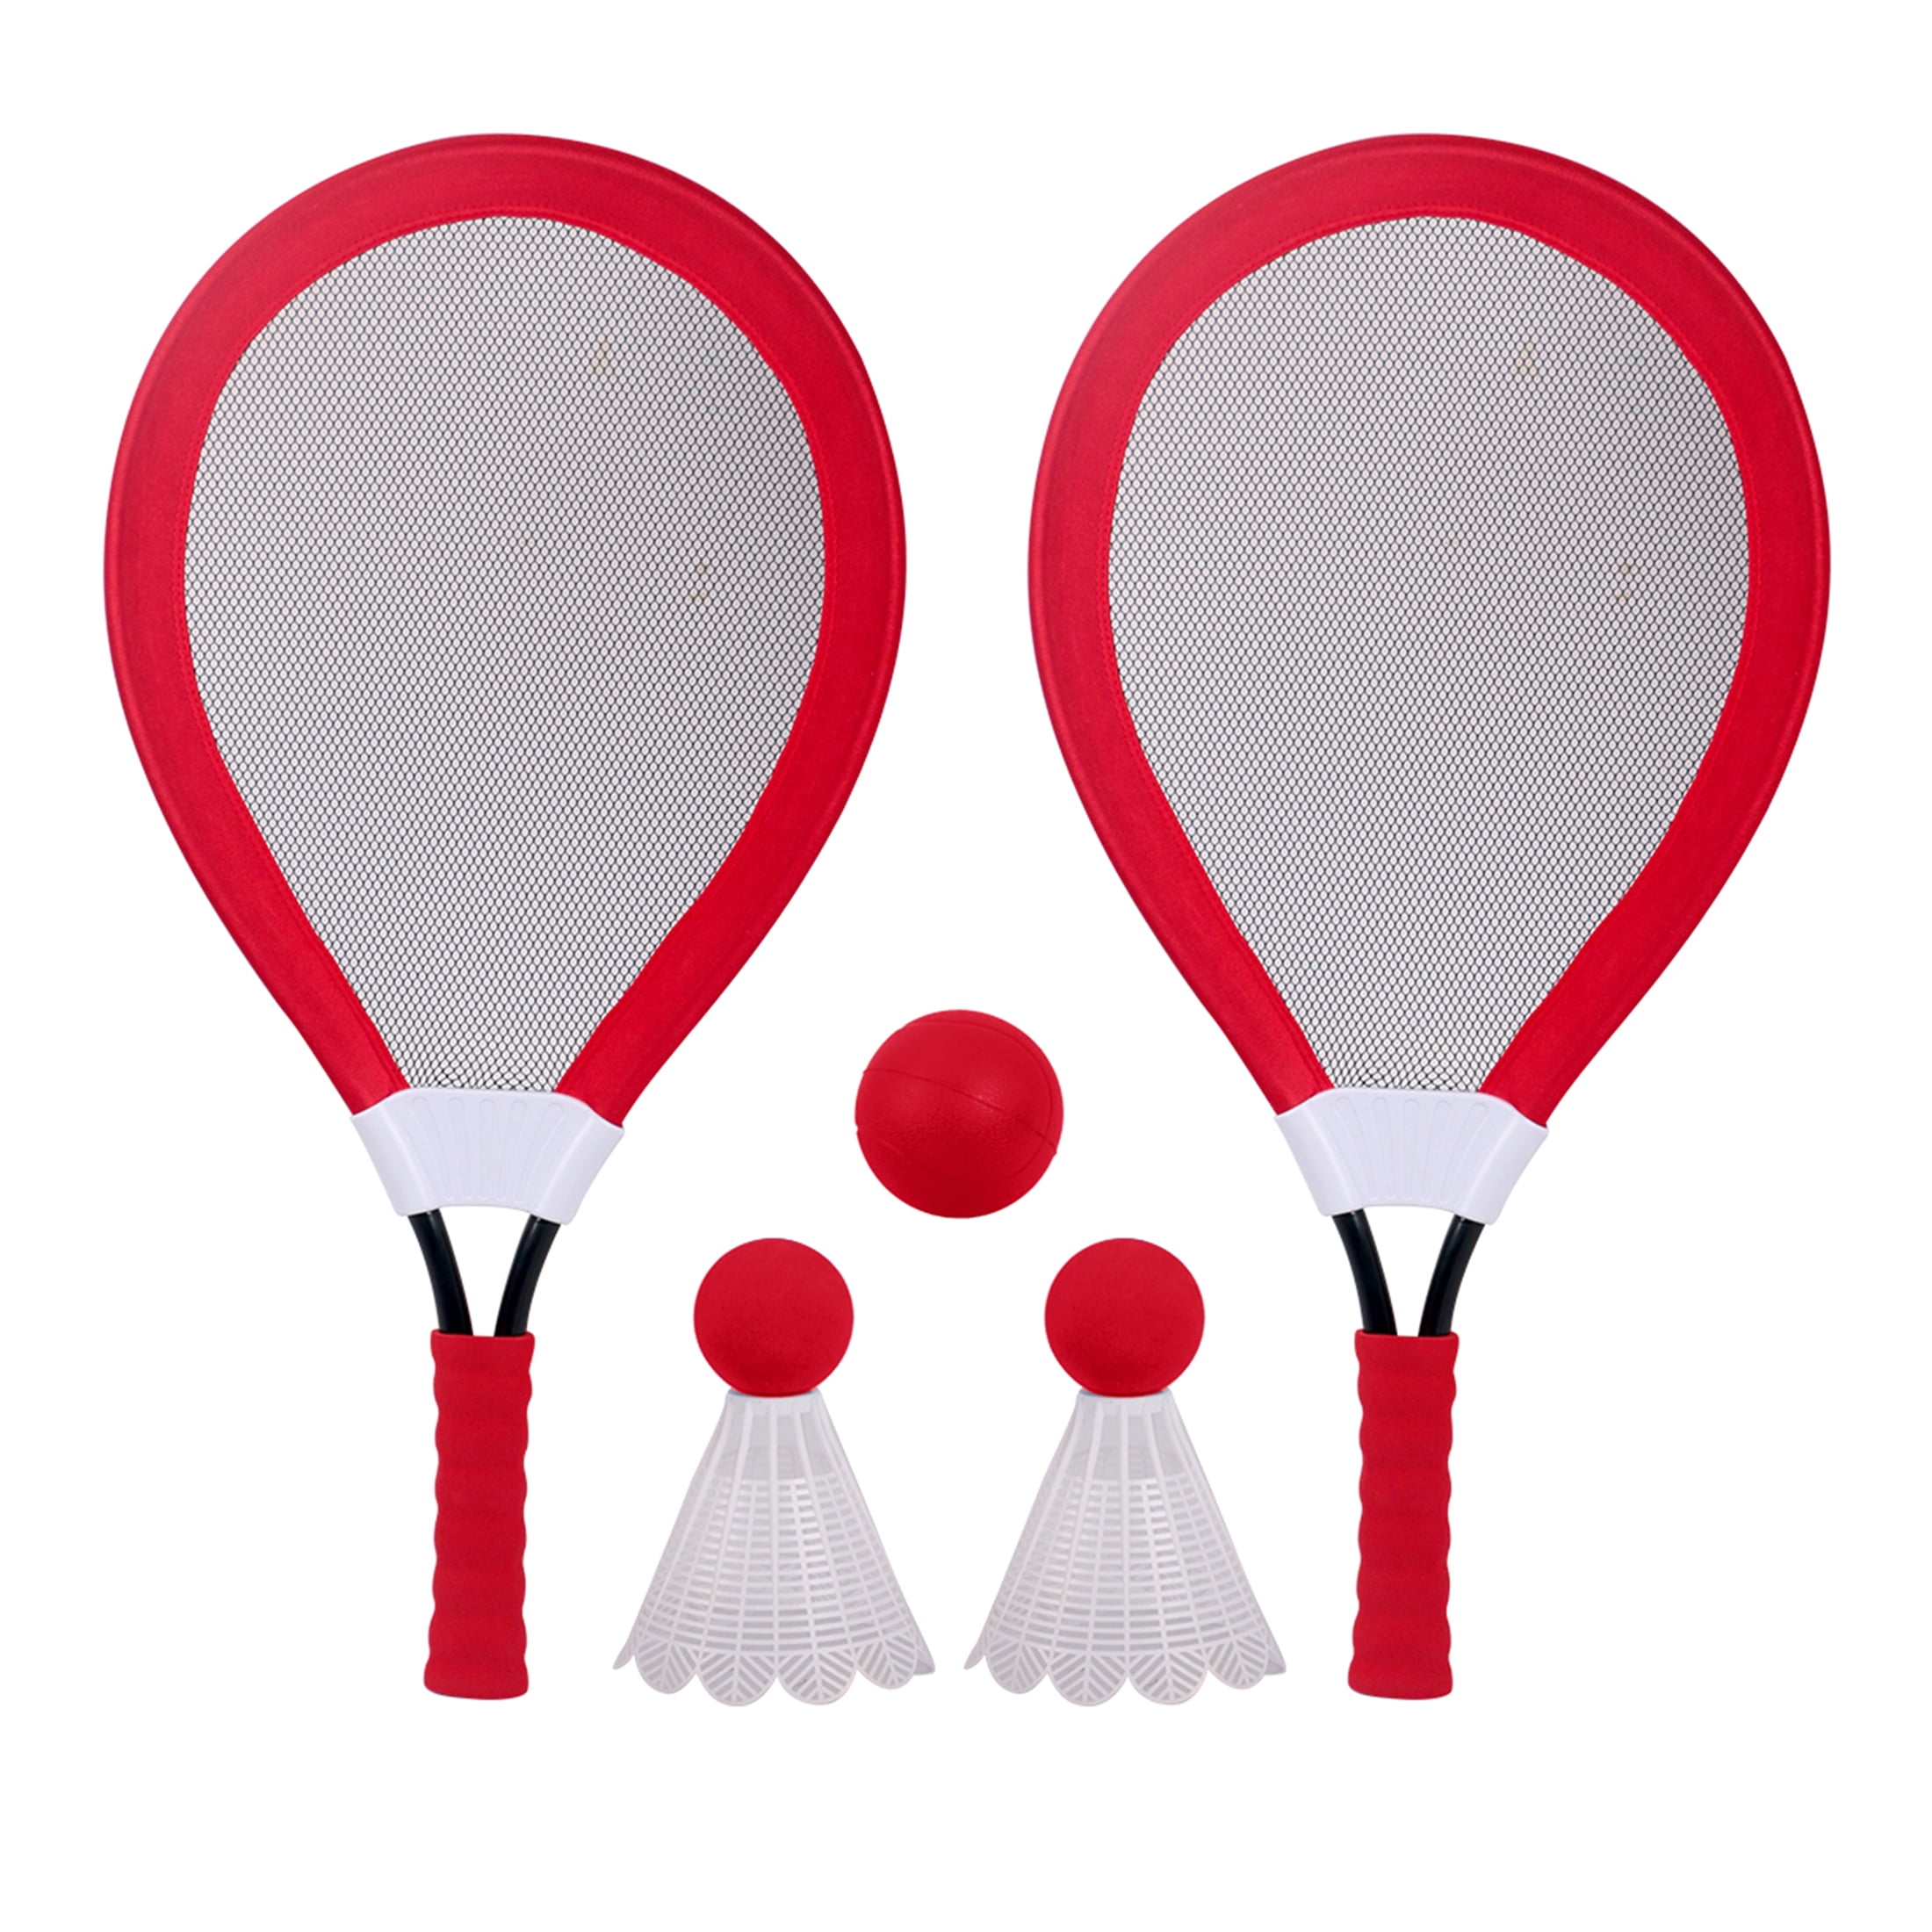 Play Day Jumbo Racket Sports Game, 5 Piece Set, Red, Children Ages 4+